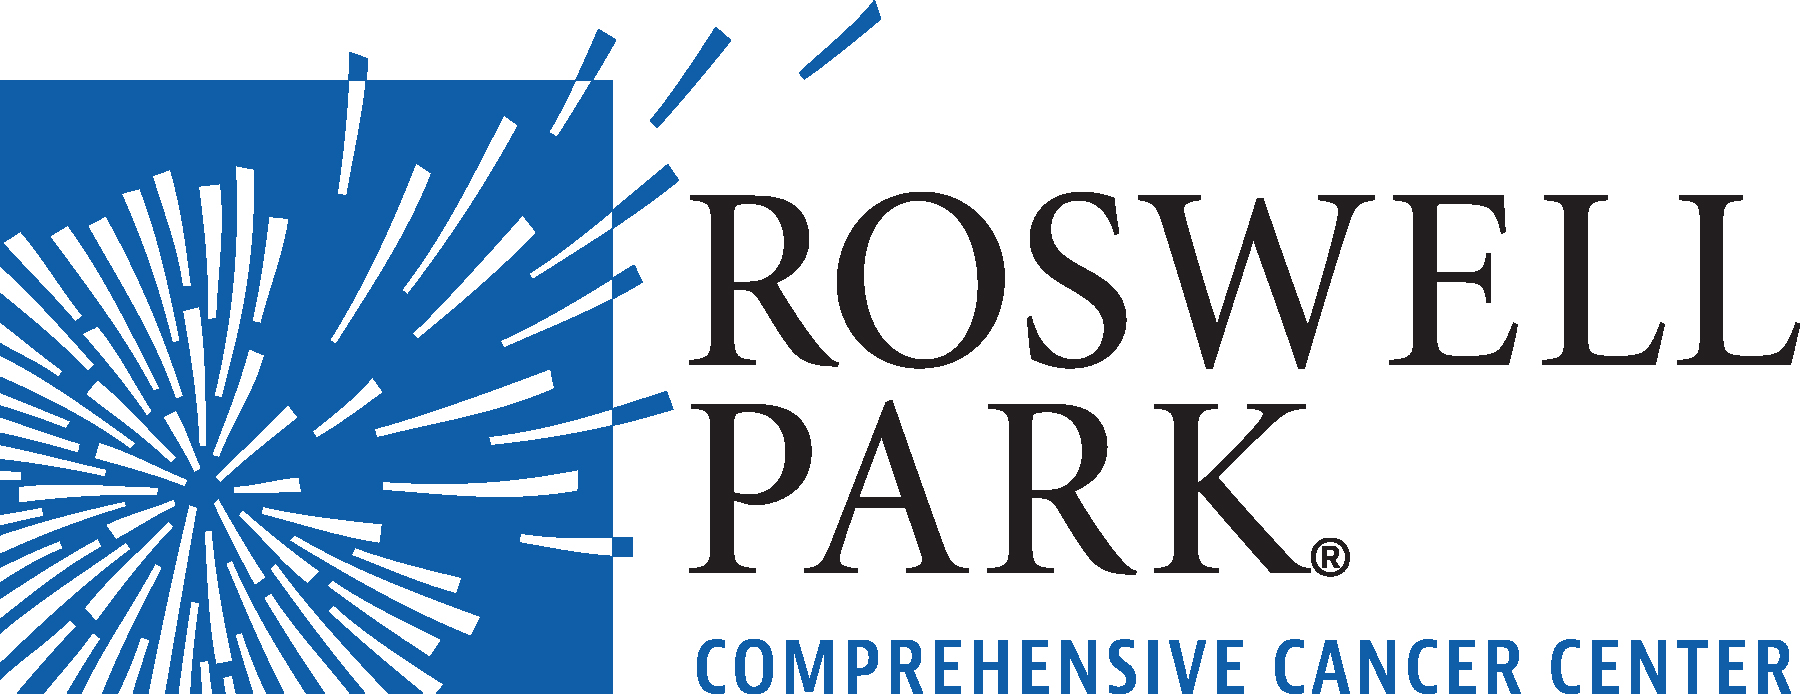 Roswell Park Inviting Nurses of All Levels to a Nursing Open House